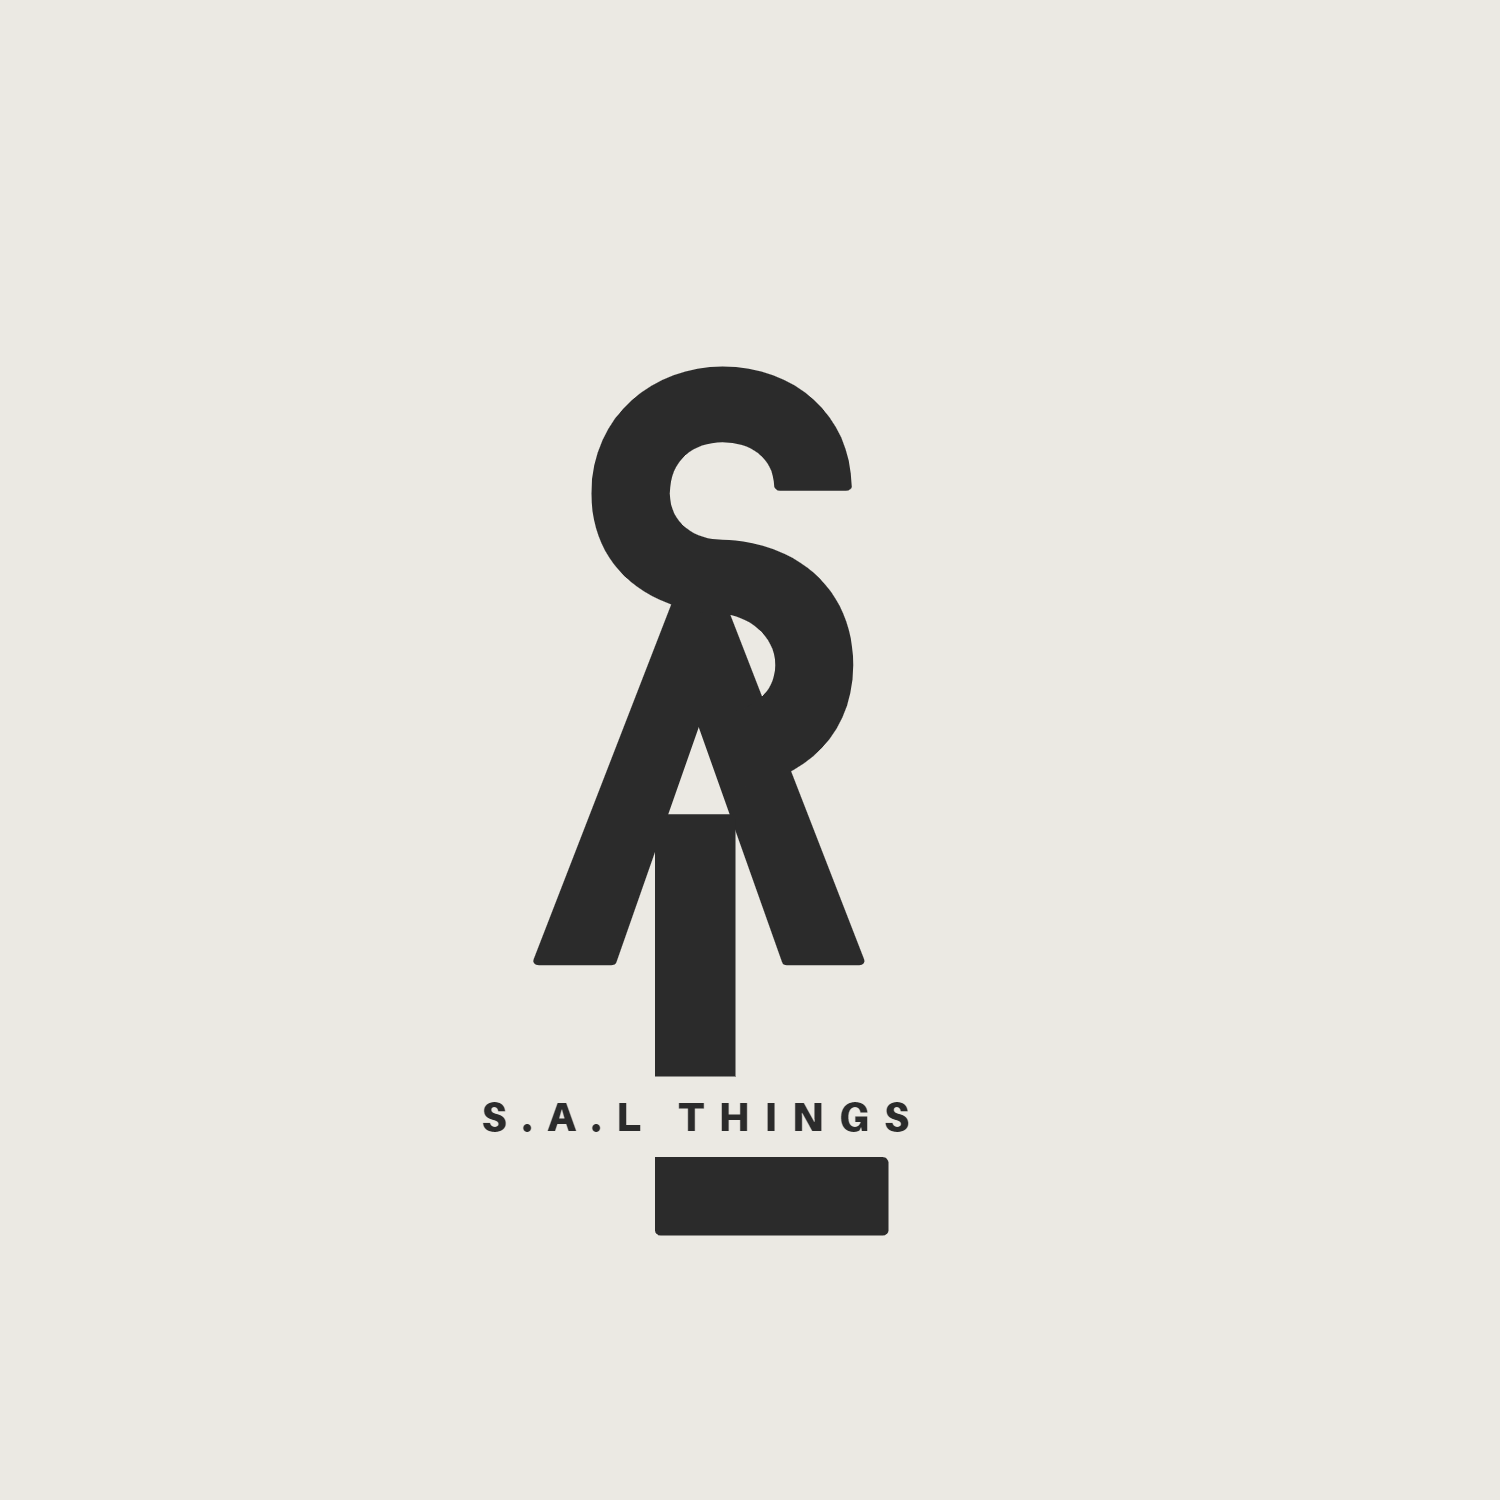 S.A.LThings